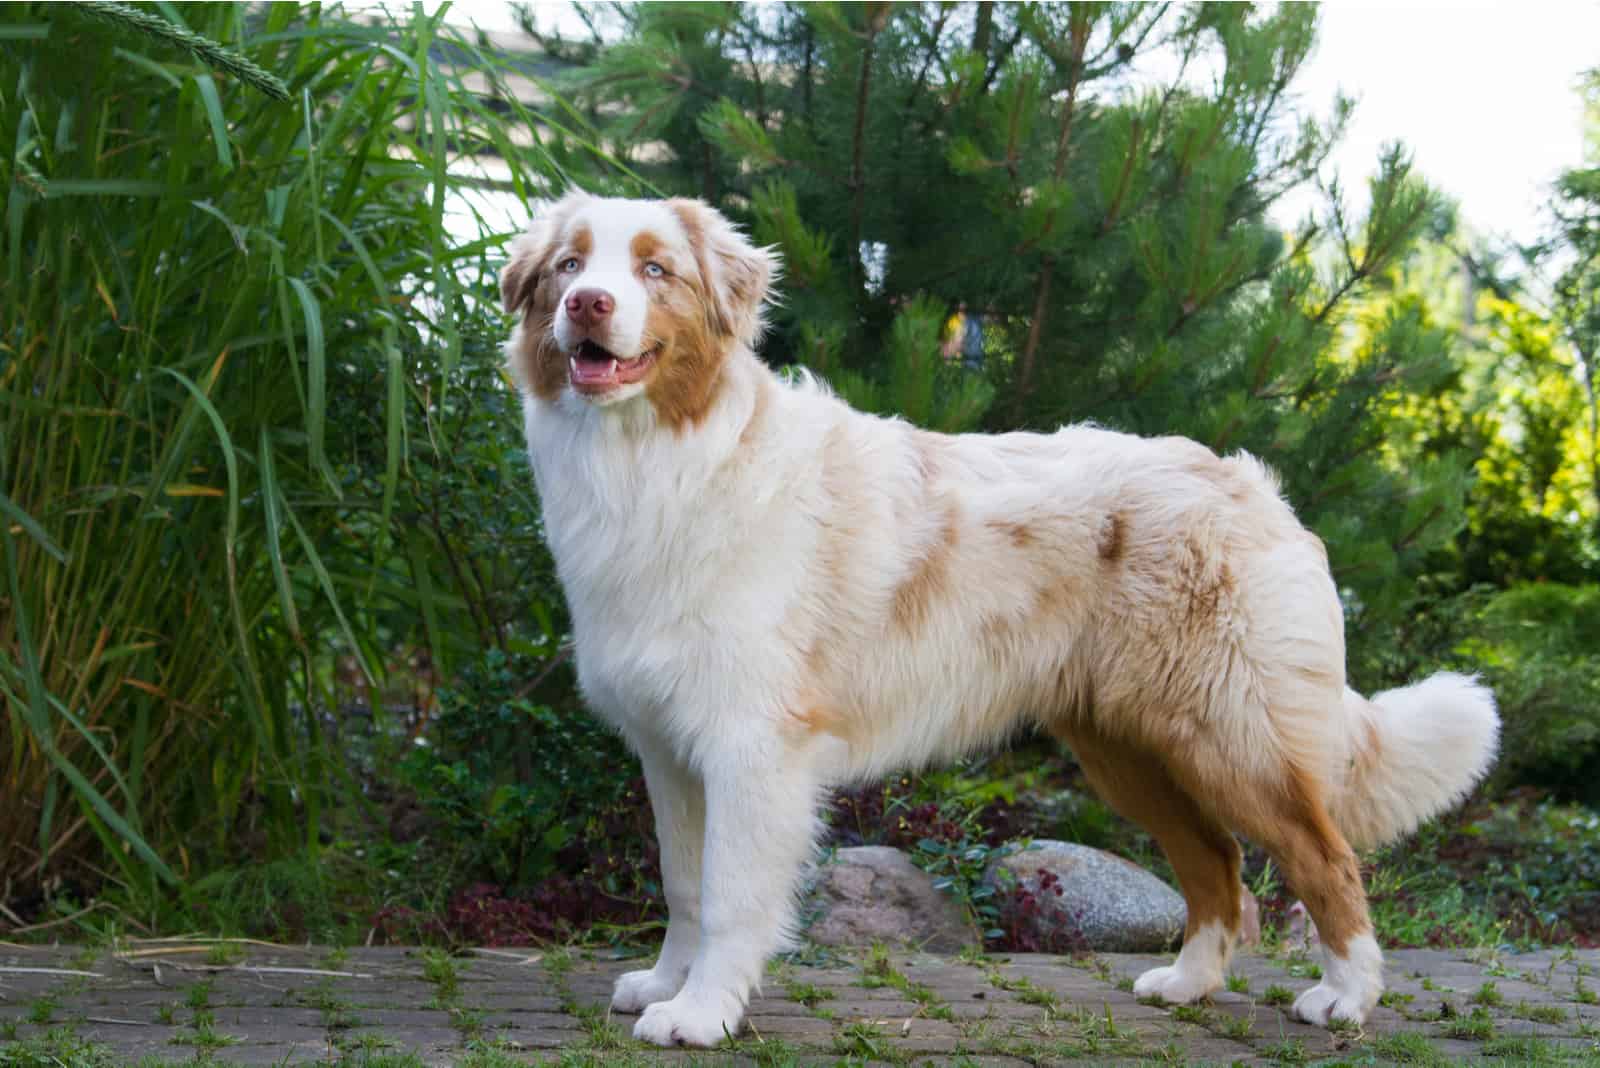 Red Merle Australian Shepherd stands and stares ahead